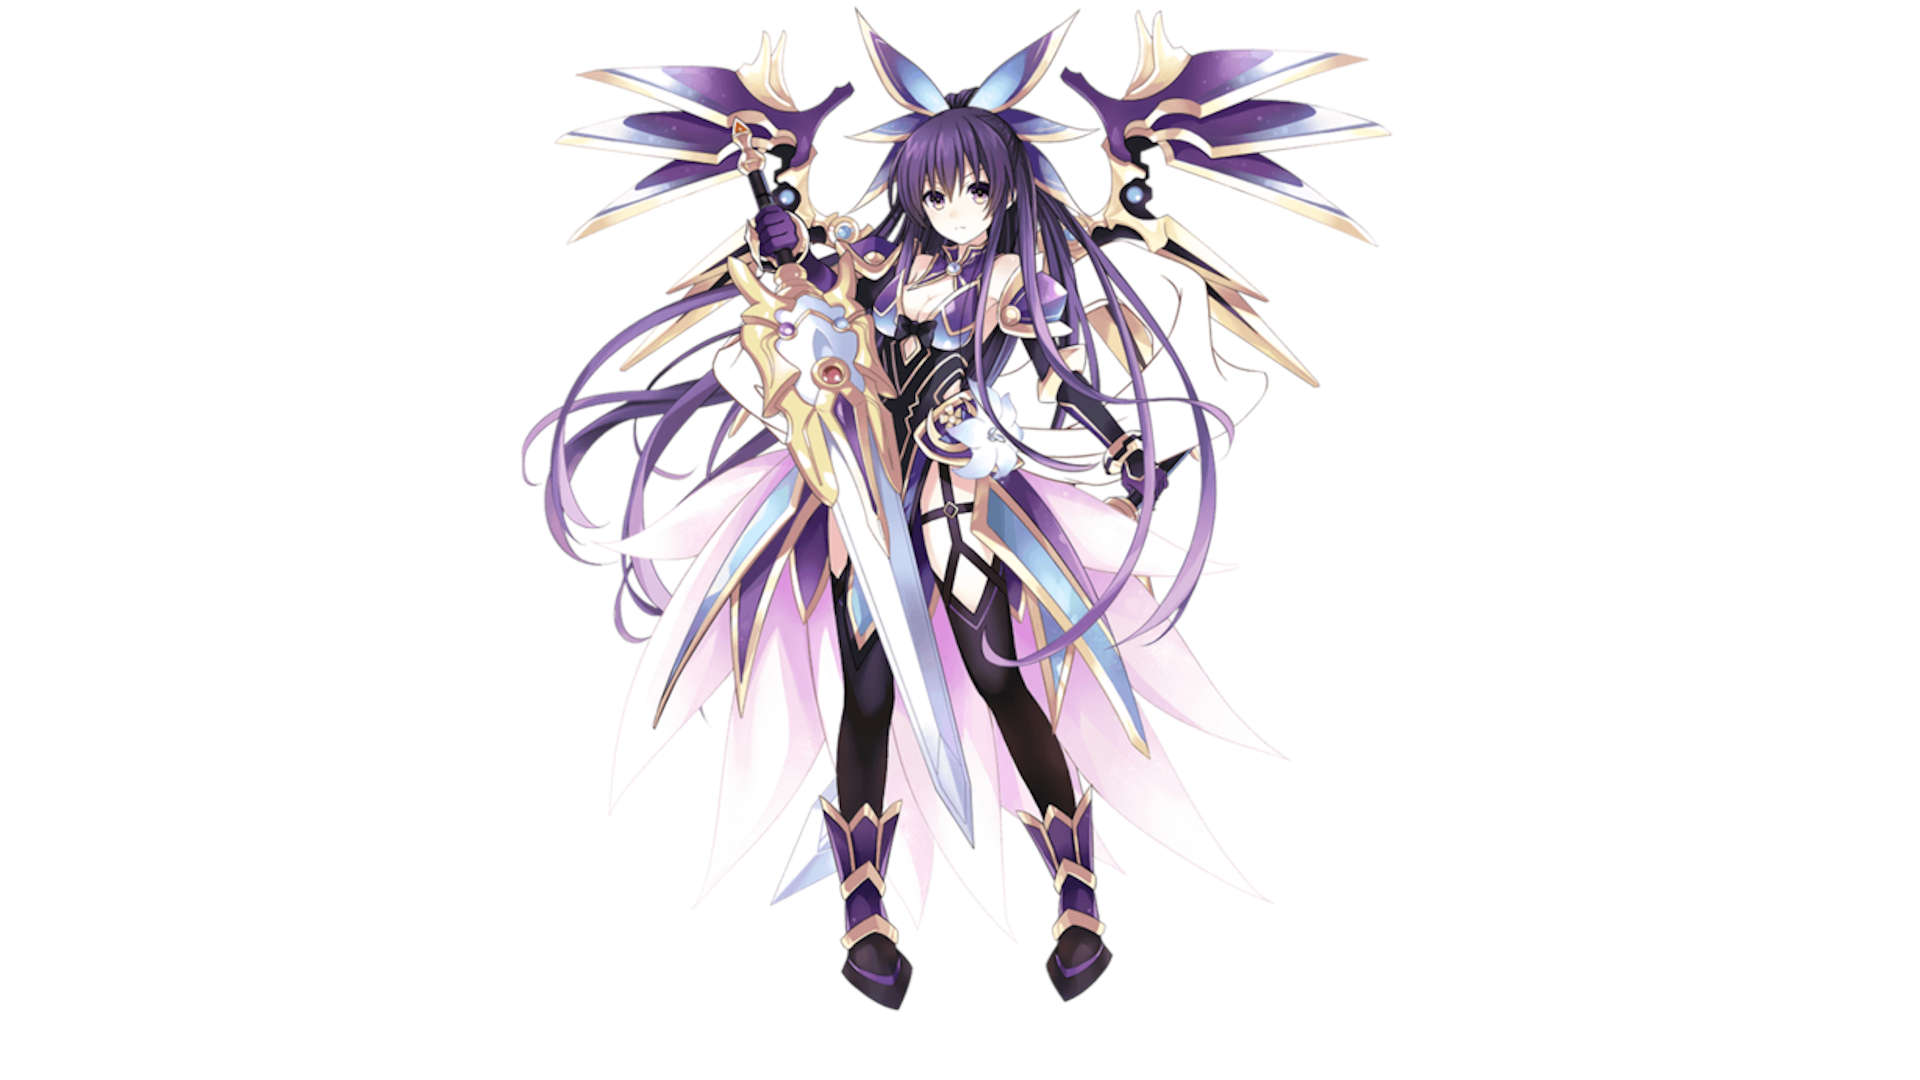 Date A Live: Spirit Pledge HD codes – coupons, cosmetics, and more